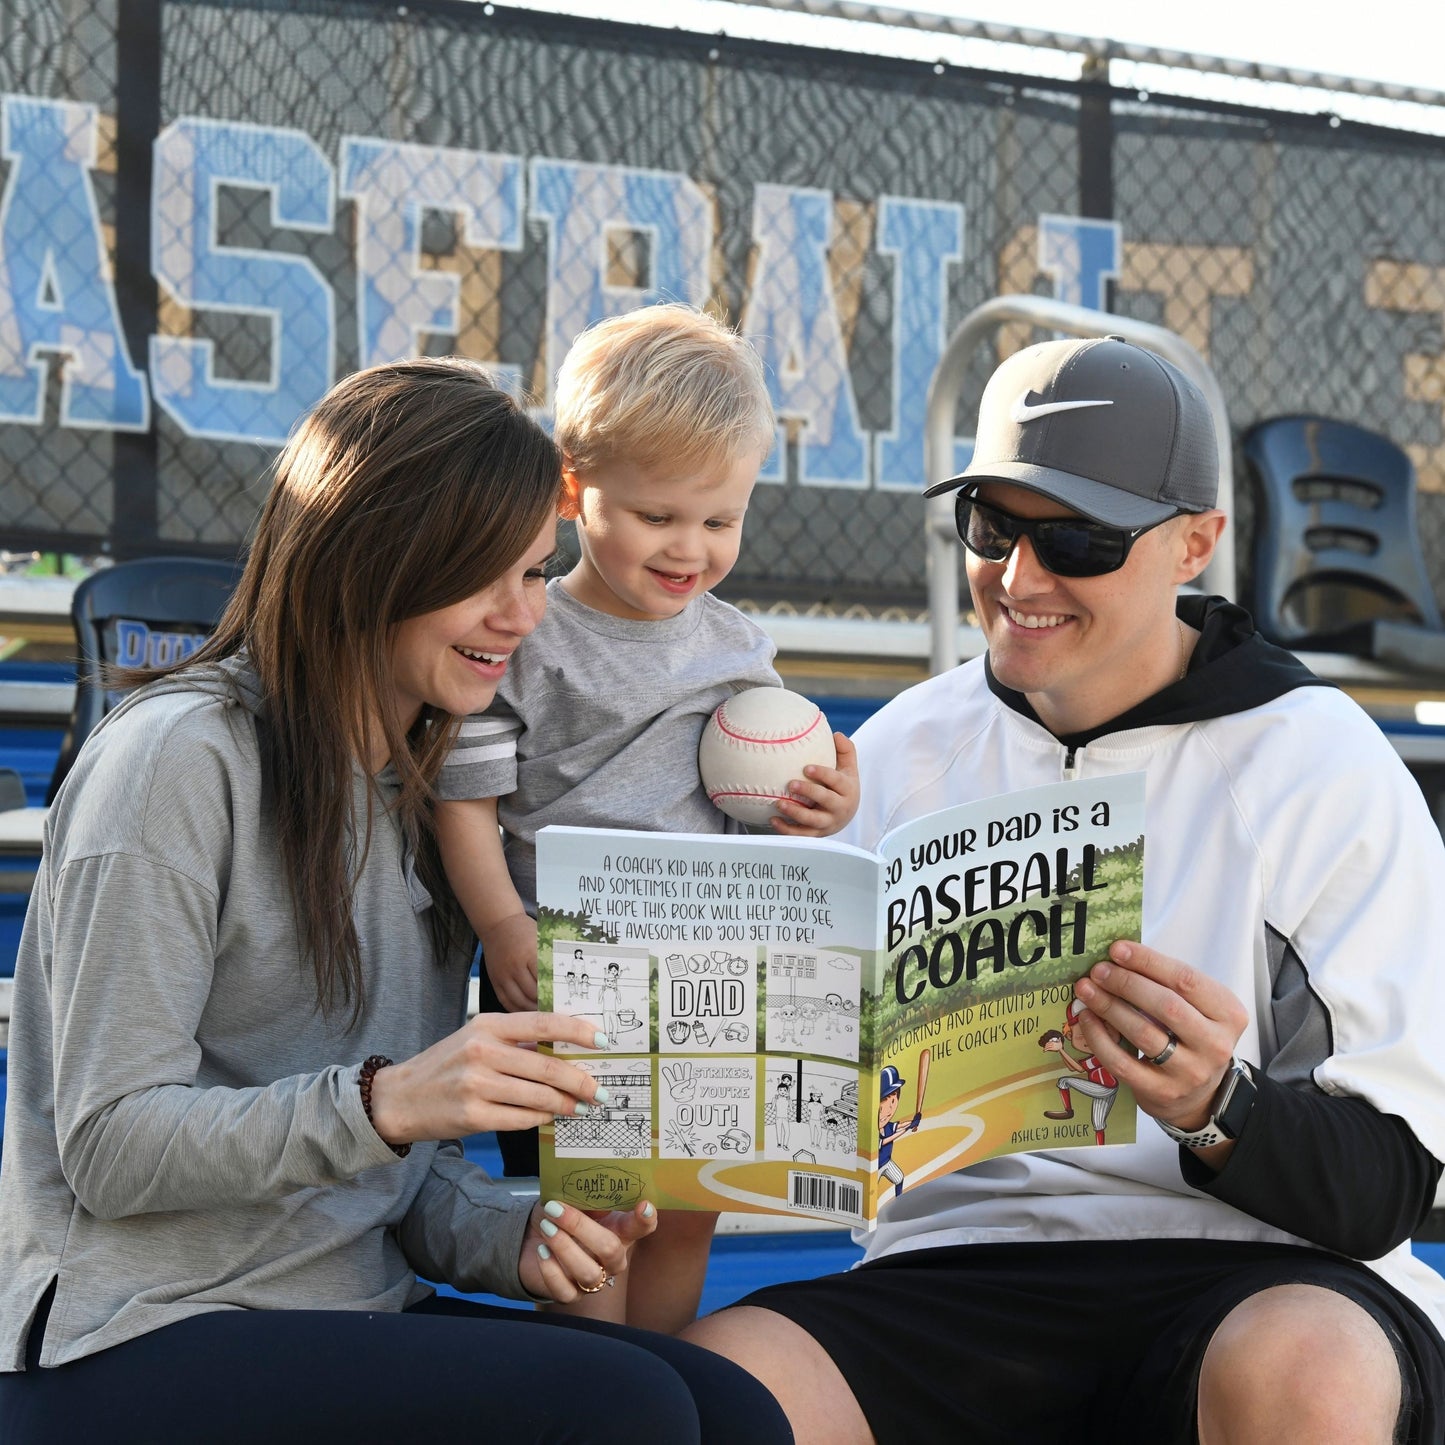 So Your Dad is a Baseball Coach: A Coloring and Activity Book for the Coach's Kid